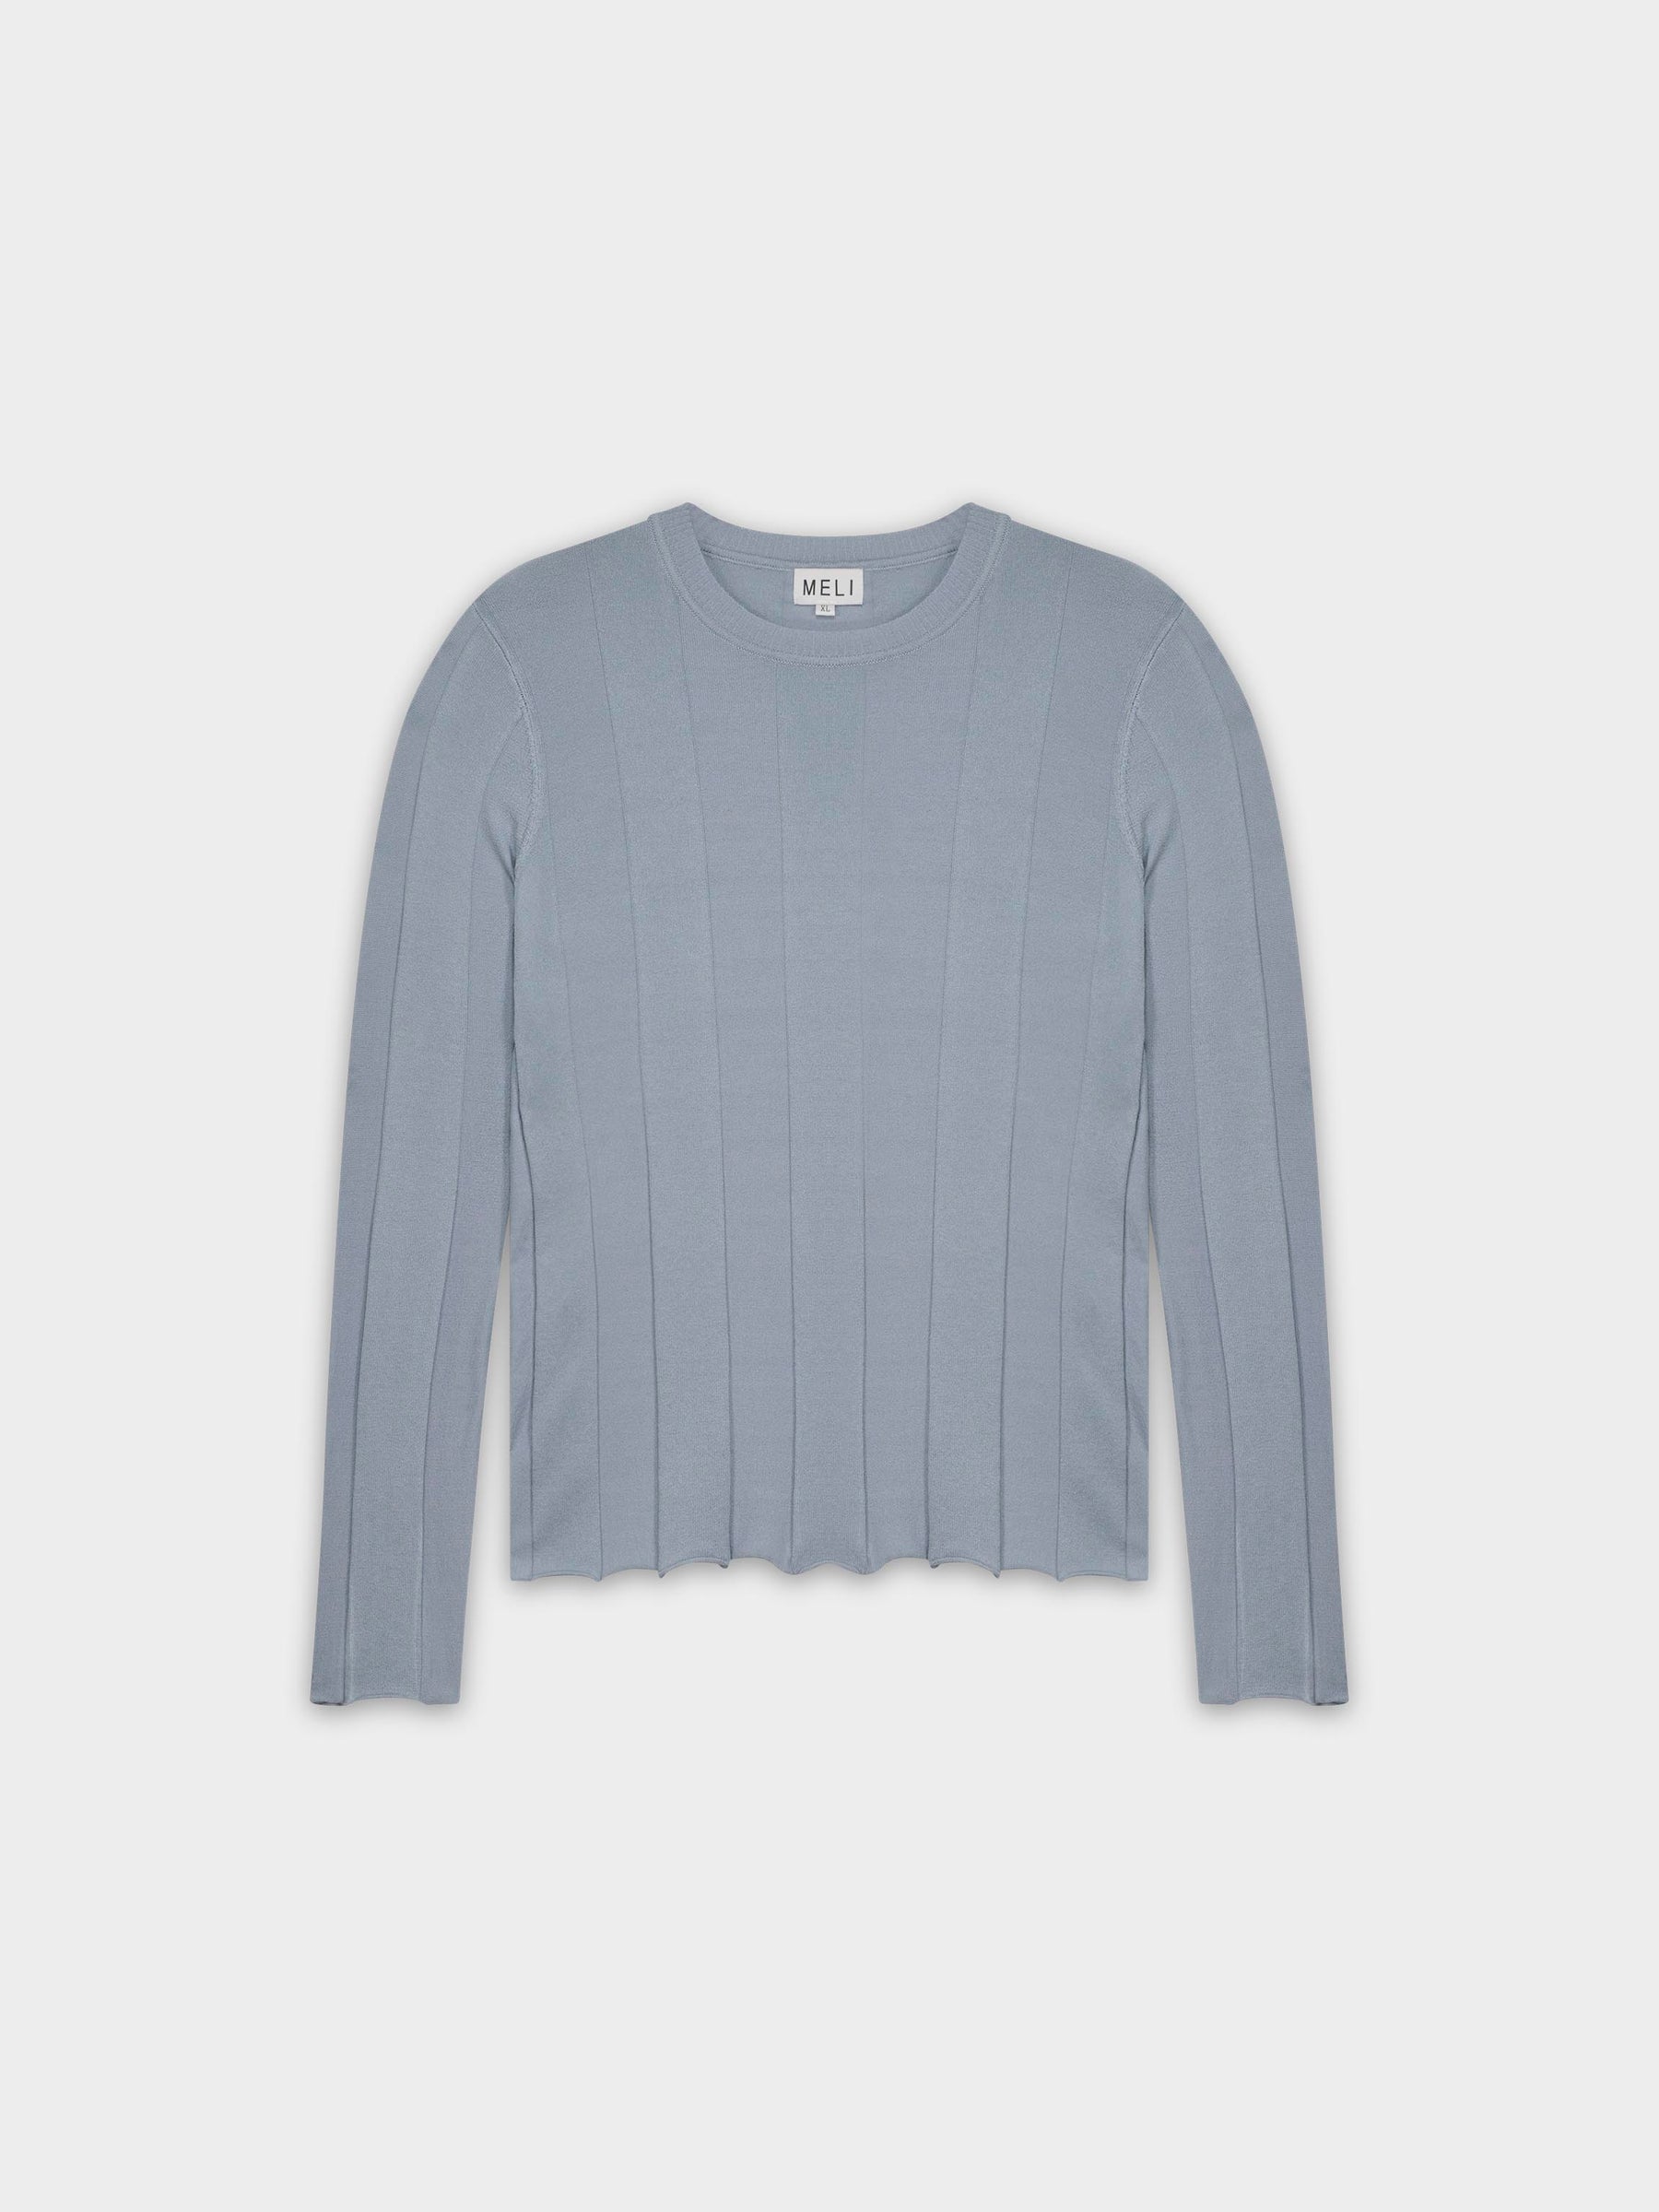 WIDE RIBBED SWEATER-STEEL BLUE